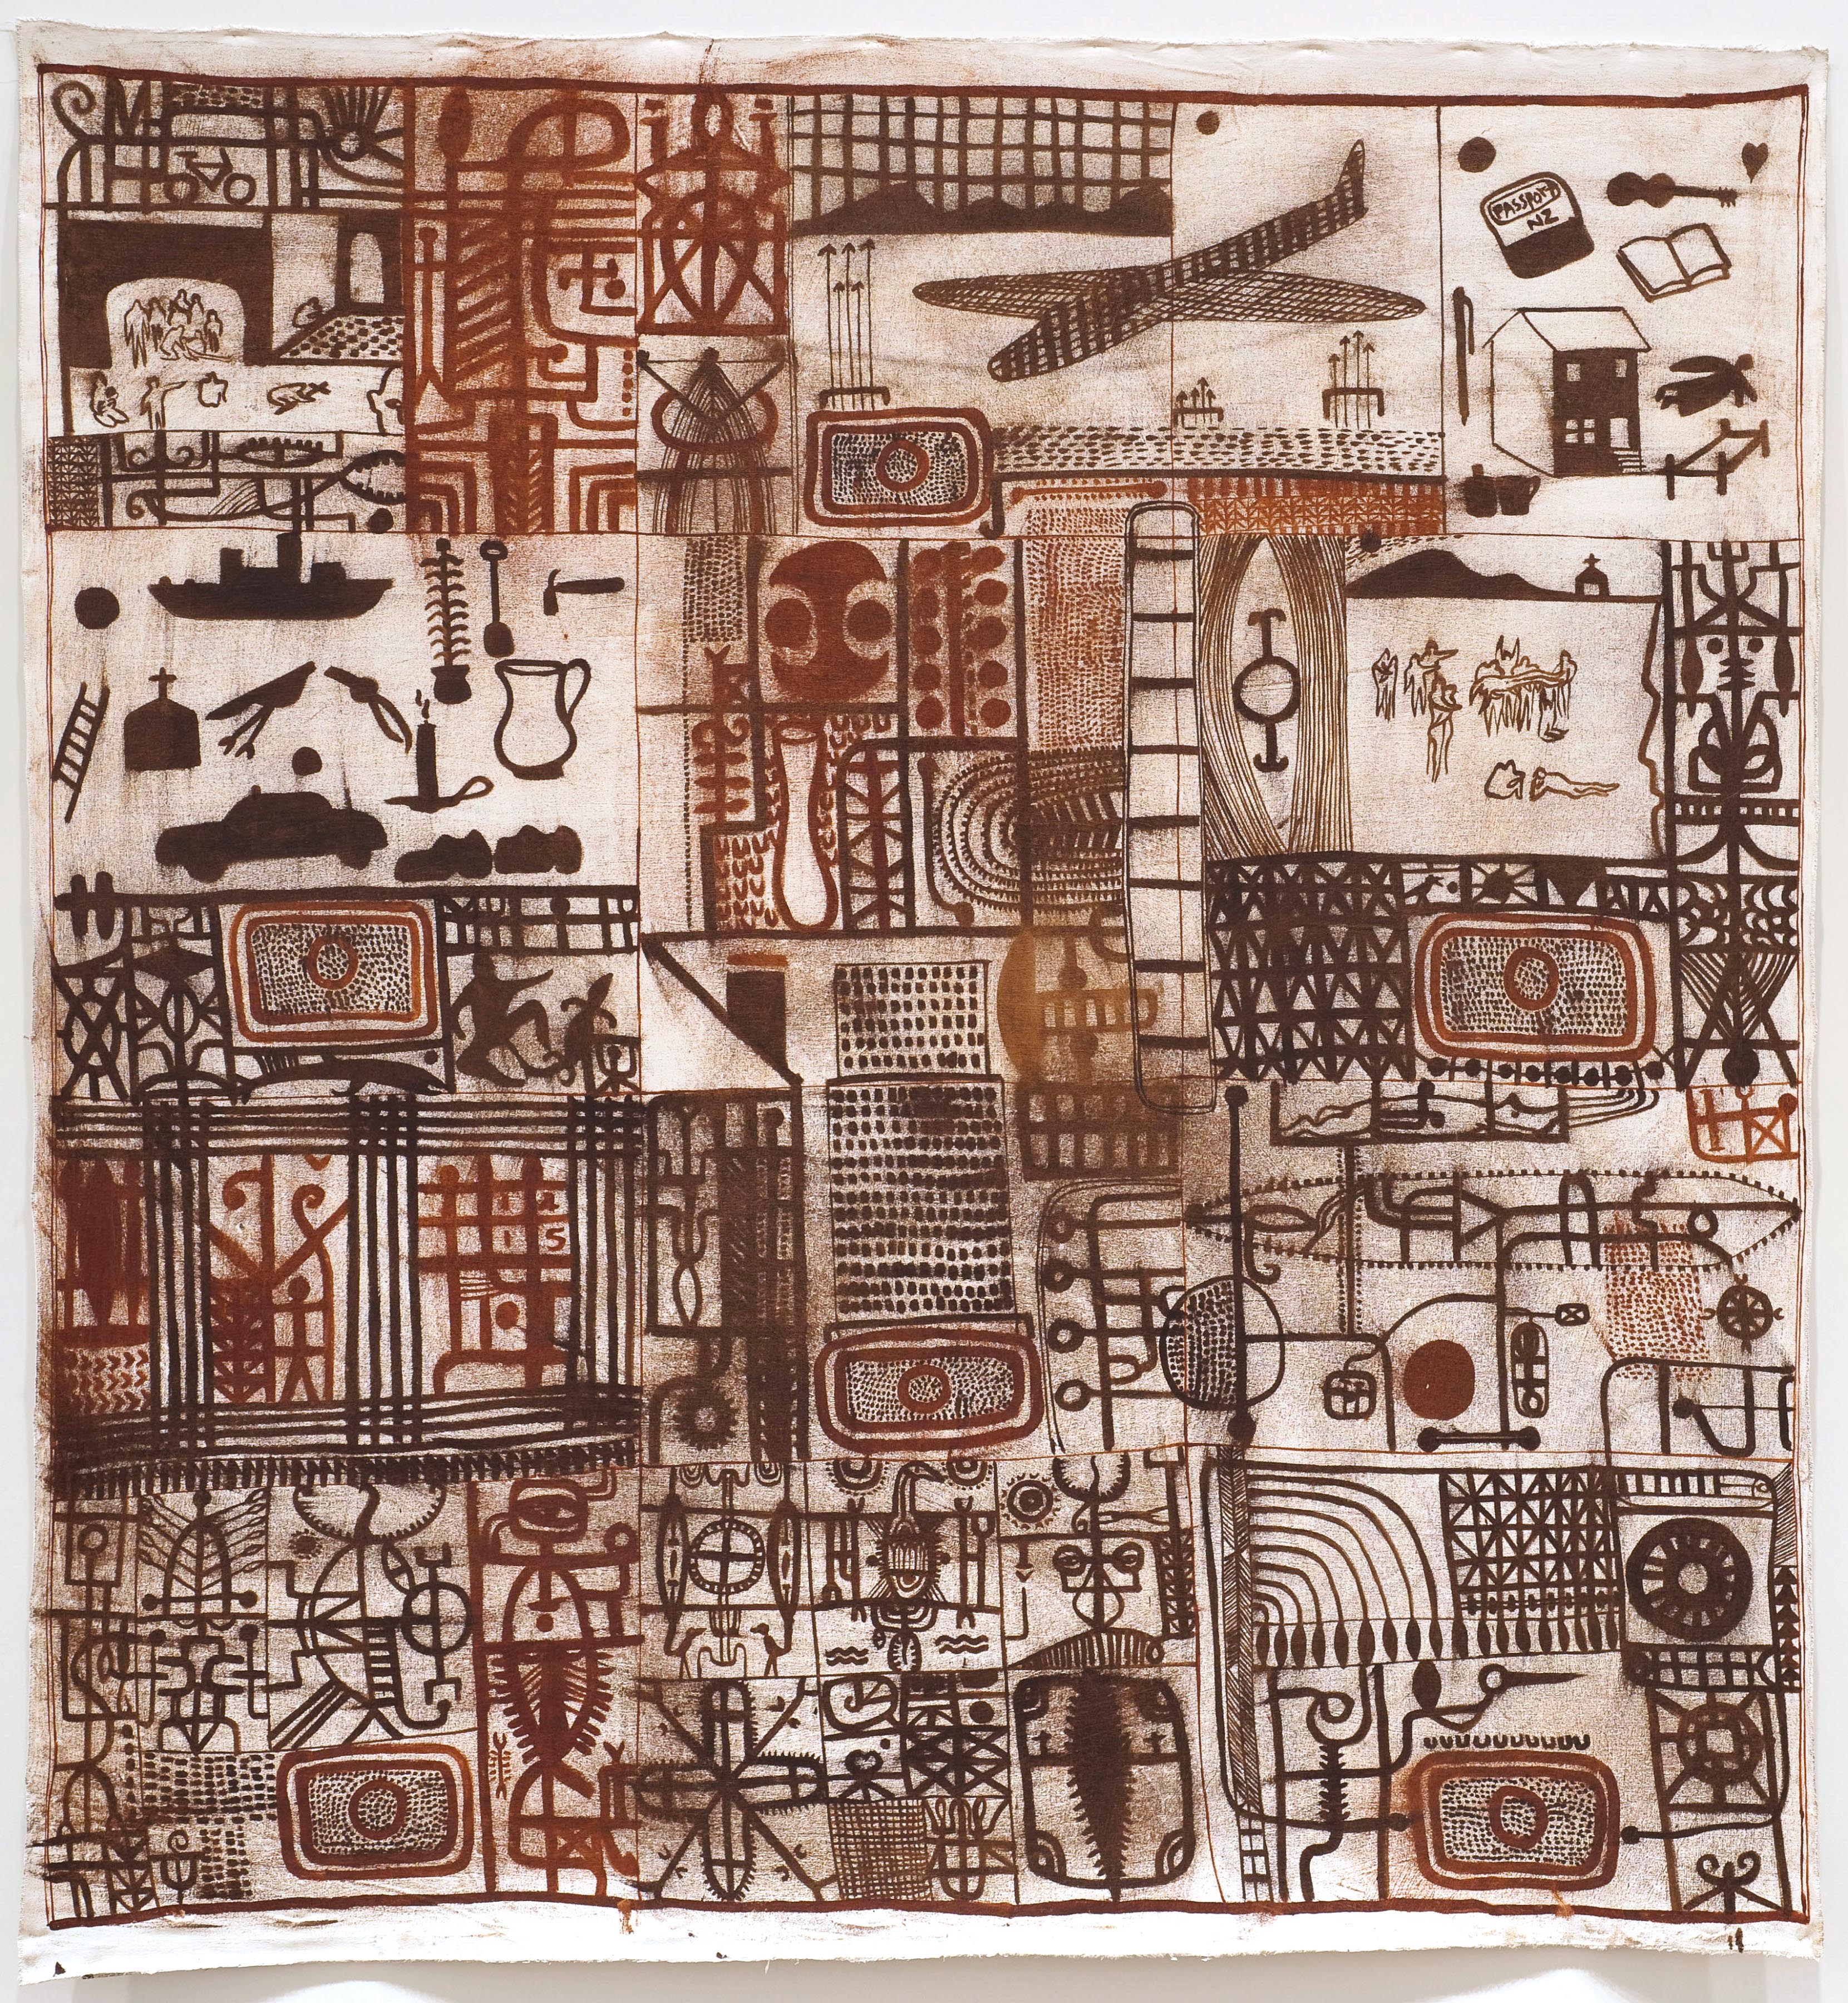 <p><strong>John Pule</strong>, <em>Take these with you when you leave,</em> 1998. Chartwell Collection, Auckland Art Gallery Toi o Tāmaki, 1998.</p>
